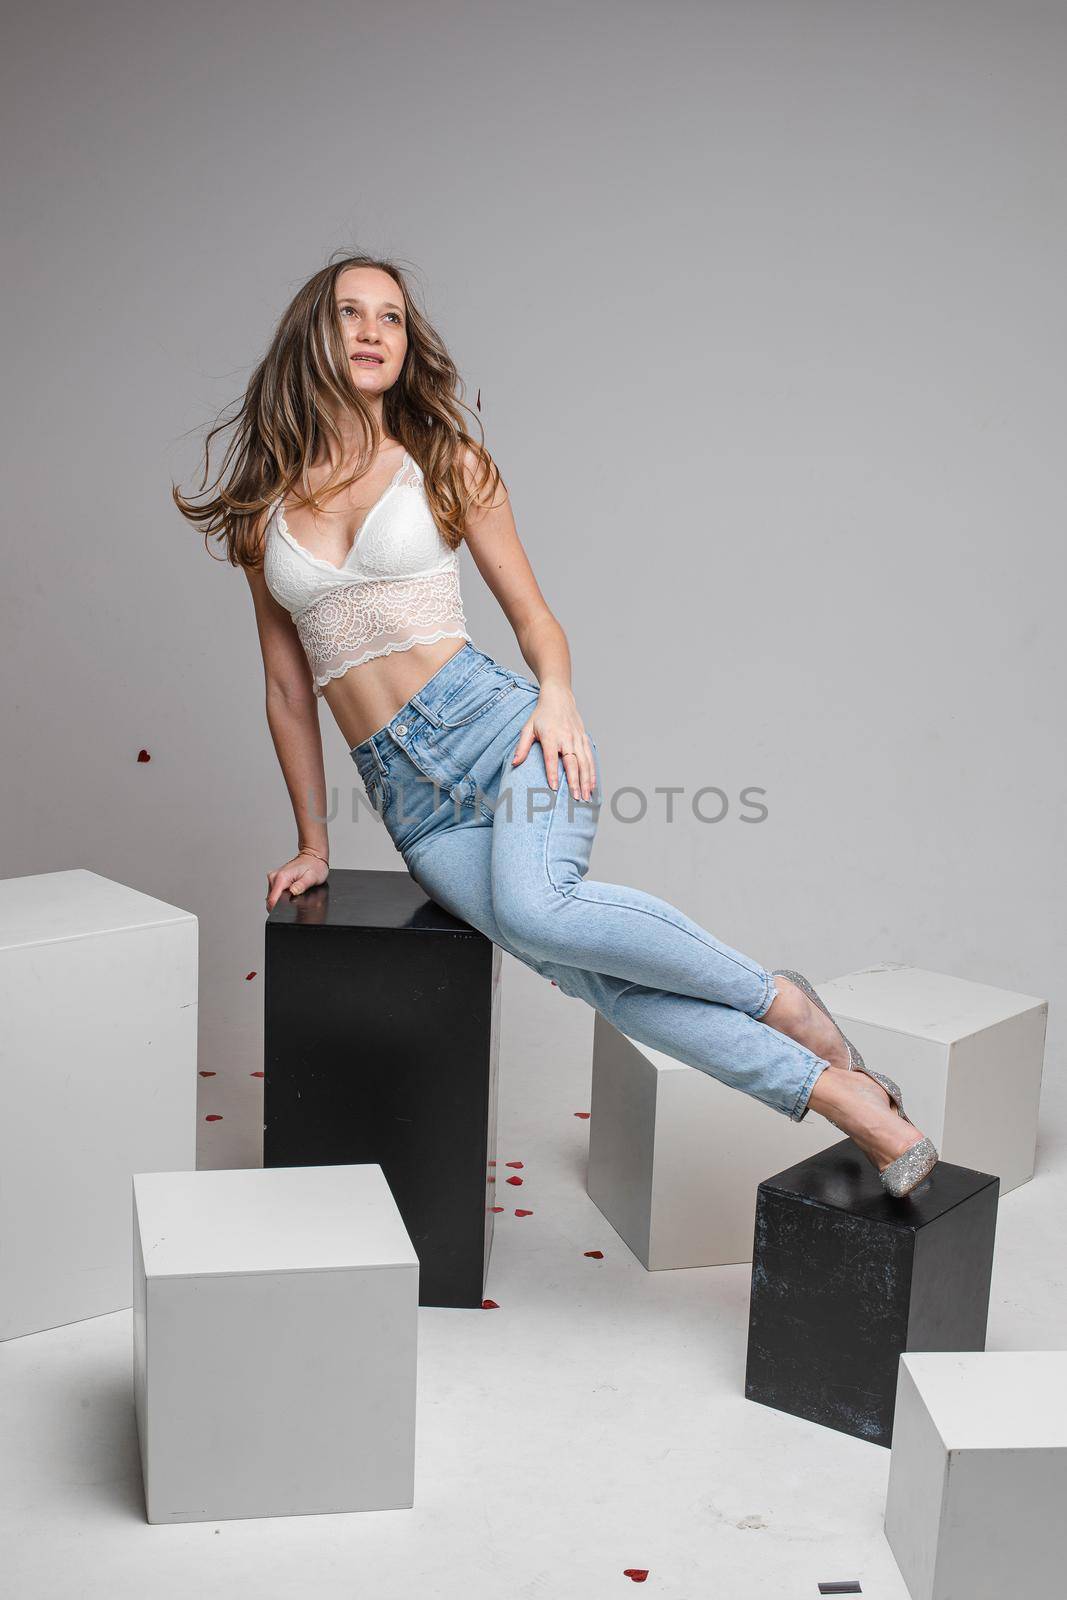 Pretty young woman lying on black boxes, isolated on grey background. Copy space. Lifestyle concept